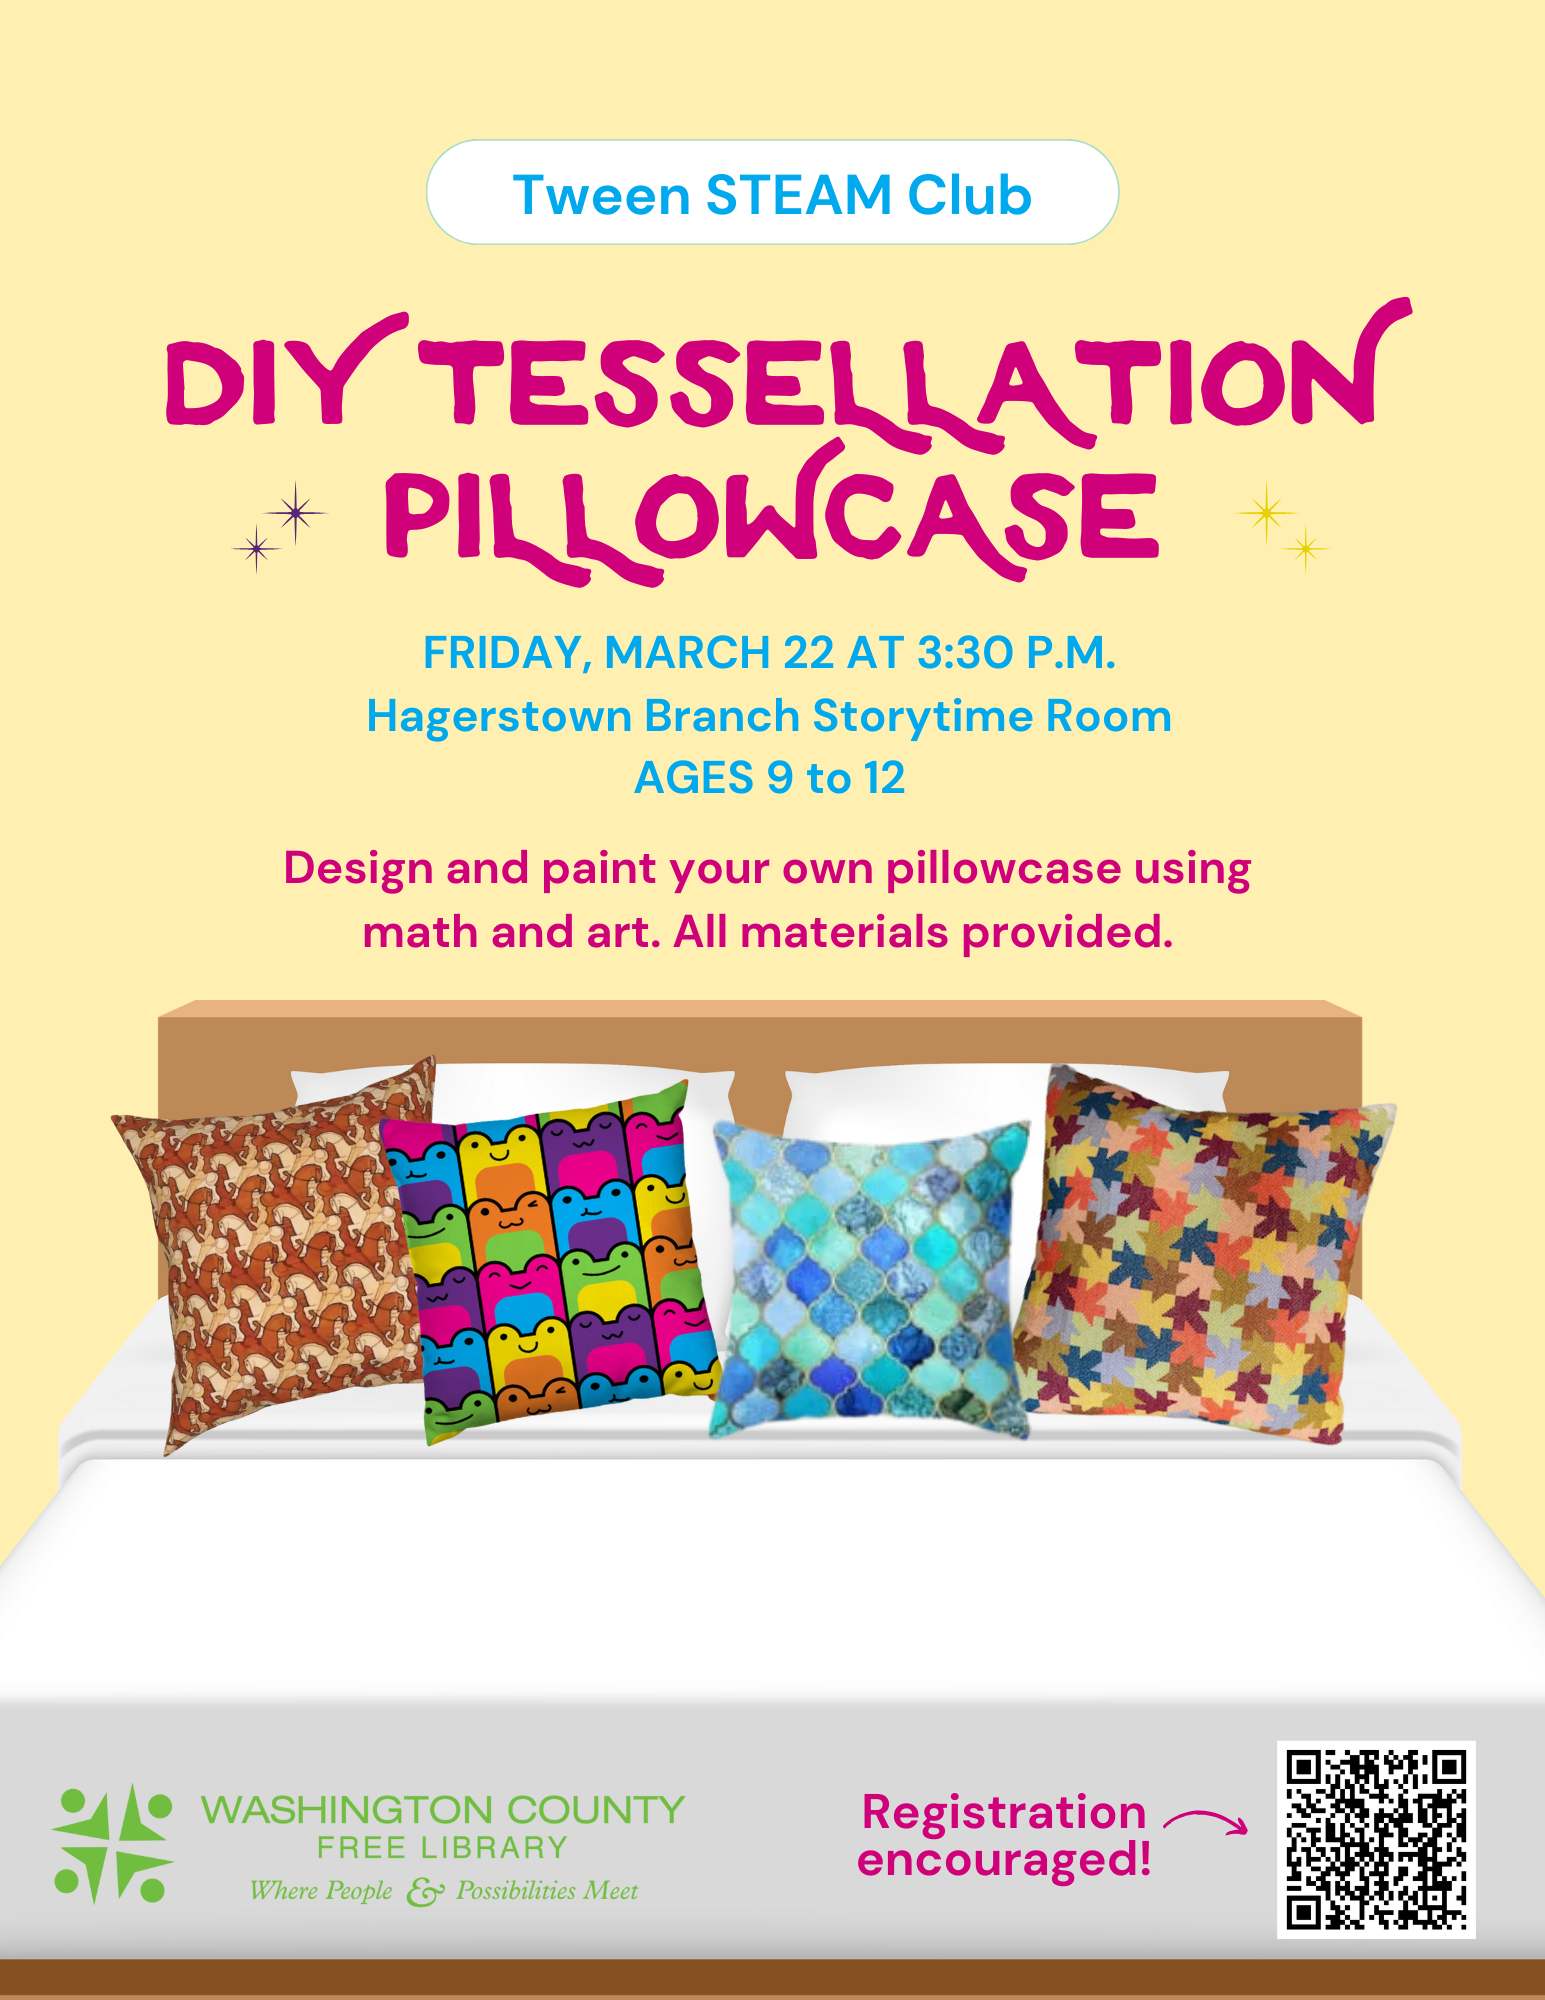 A cozy bed topped with four colorful pillows bedecked with tessellation pillowcases rests at the bottom of the page. Above it, Tween STEAM Club DIY Tessellation Pillowcase. Friday, March 22 at 3:30 p.m. Hagerstown Branch Storytime Room Ages 9 to 12. Registration encouraged, with a scannable QR code in the lower right hand corner. 